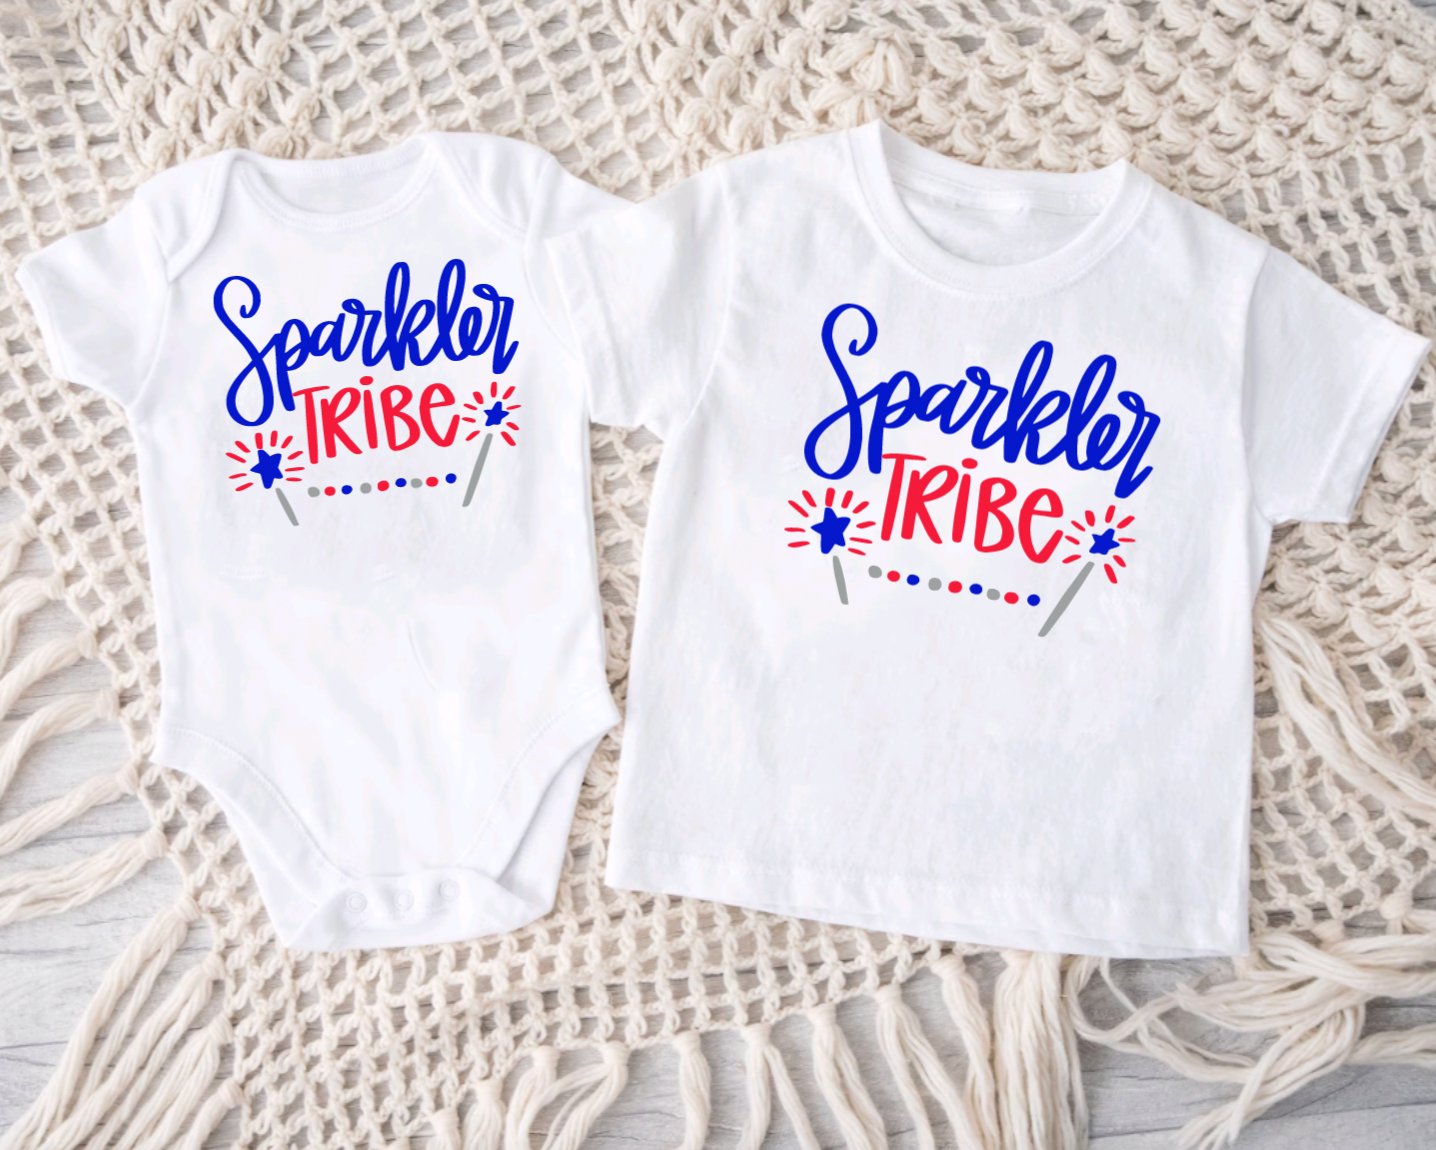 Sparkler Tribe 4th of July Matching White Tees